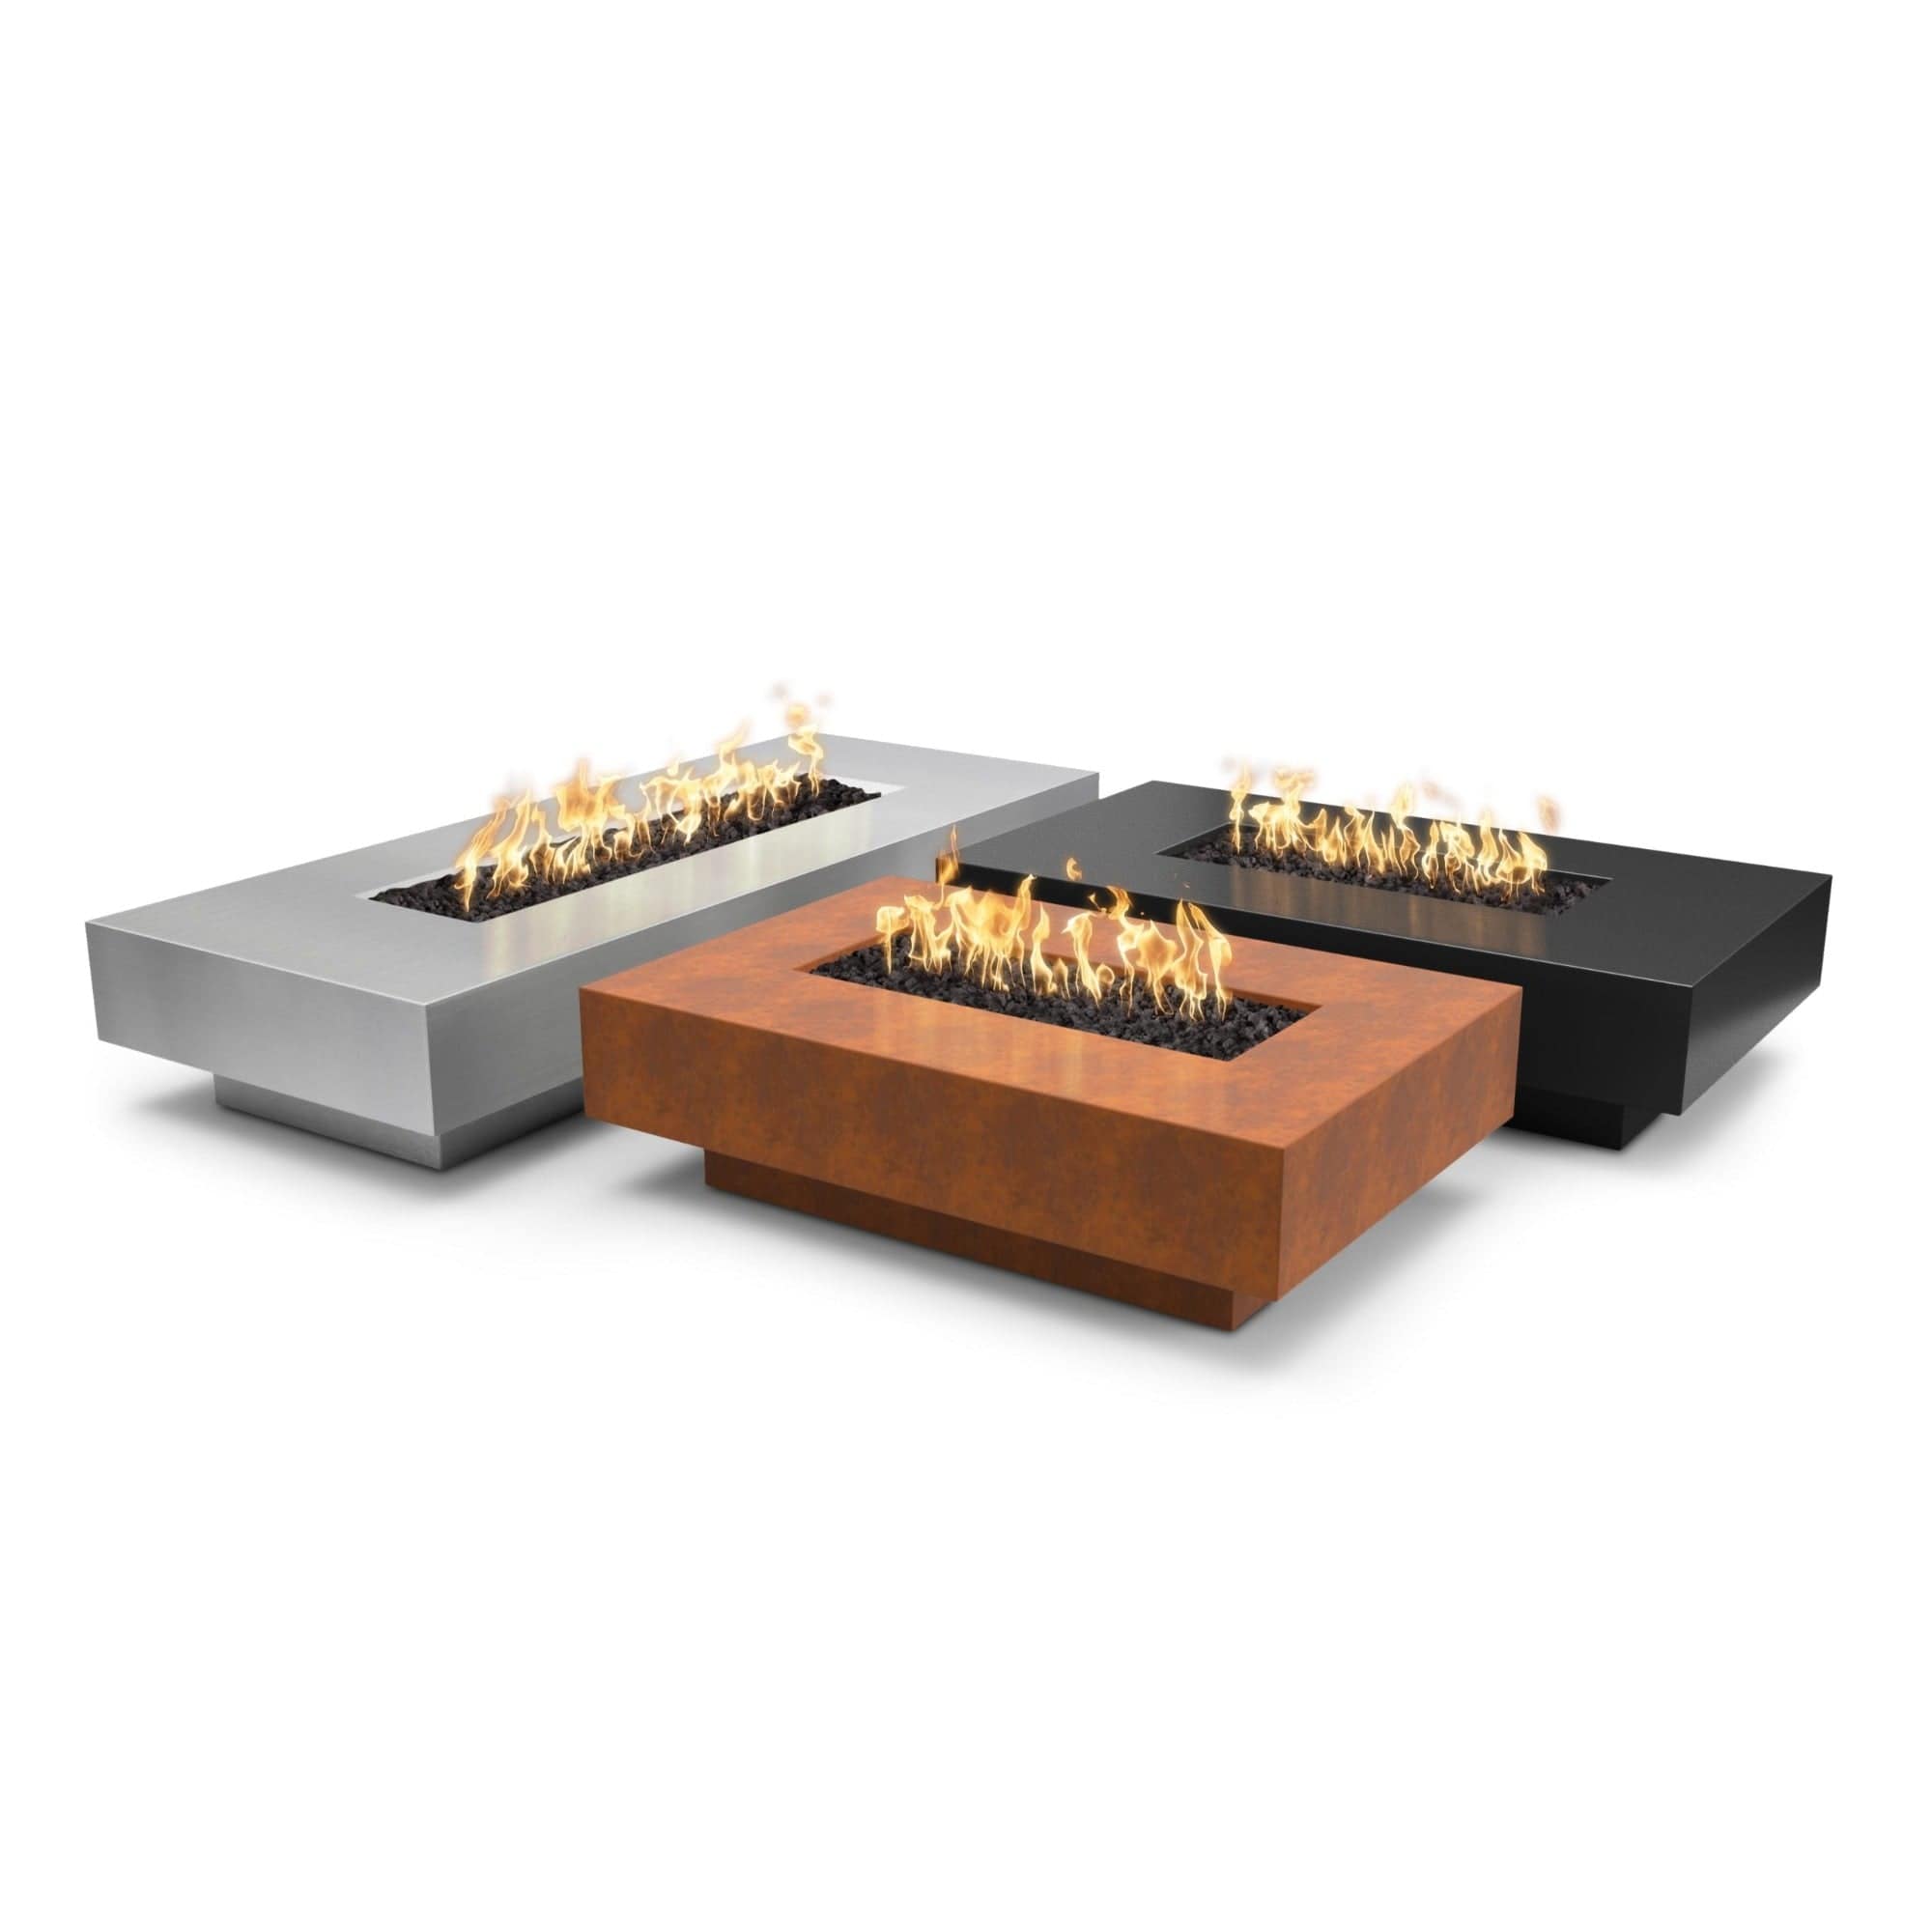 The Outdoor Plus Fire Features The Outdoor Plus LINEAR CABO METAL FIRE PIT